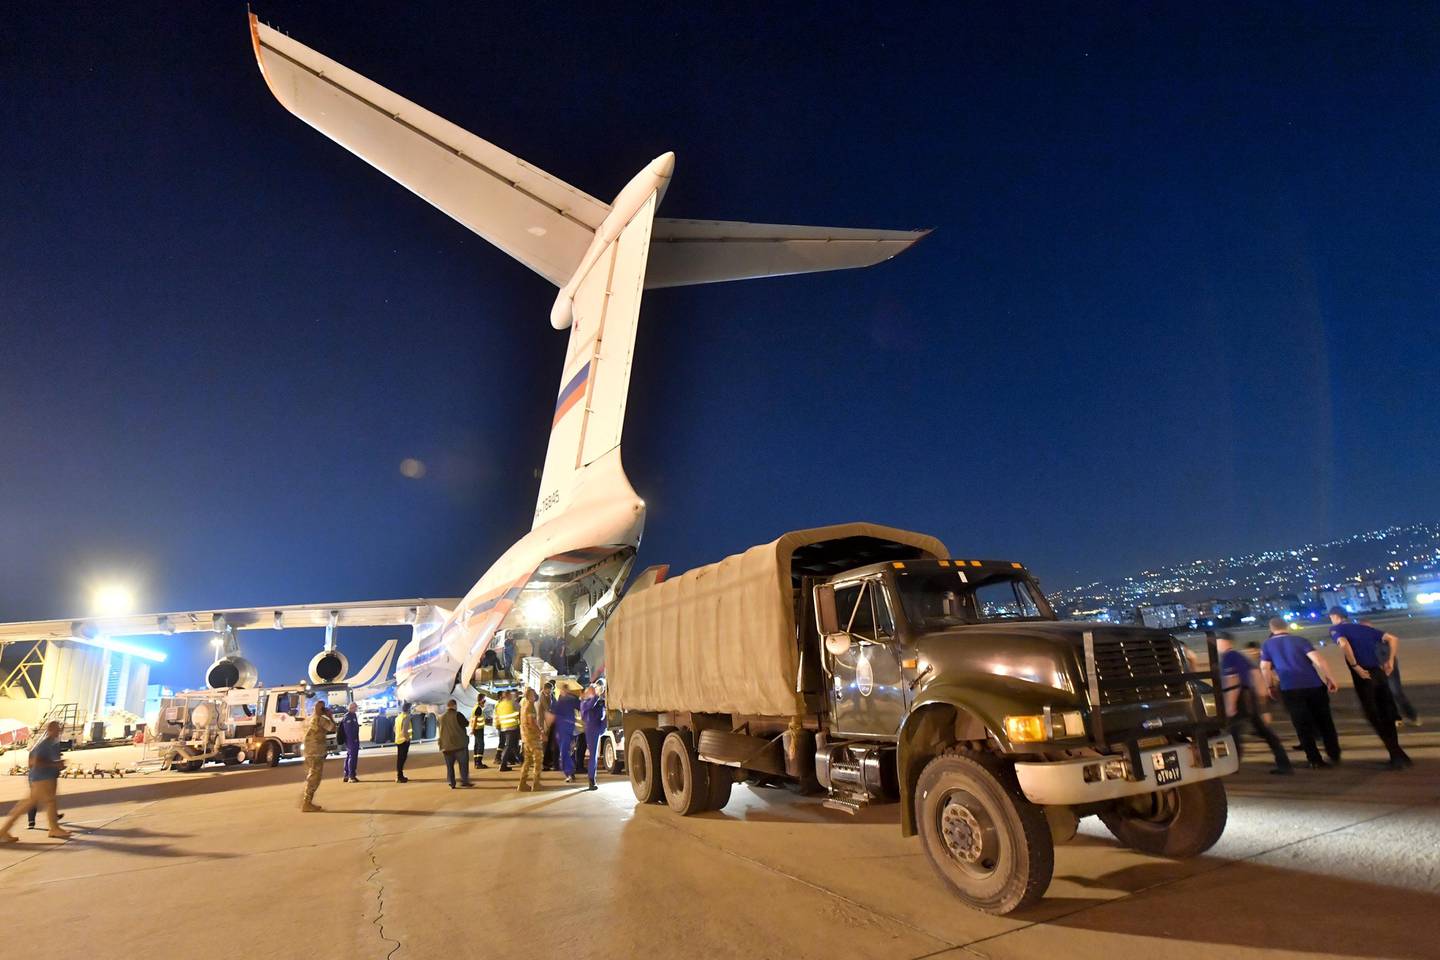 In this photo provided by Russian Emergency Situations Ministry press service, workers unload boxes of Russian aid supplies from a Russian cargo plane into a truck at an airport in Beirut, Lebanon, late Wednesday, Aug. 5, 2020. Russia's emergency officials say the country sent five planeloads of aid to Beirut after an explosion in the Lebanese capital's port killed at least 100 people and injured thousands on Tuesday. Russia's Ministry for Emergency Situations sent rescuers, medical workers, a makeshift hospital and a lab for coronavirus testing to Lebanon. (AP Photo/Ministry of Emergency Situations press service via AP)